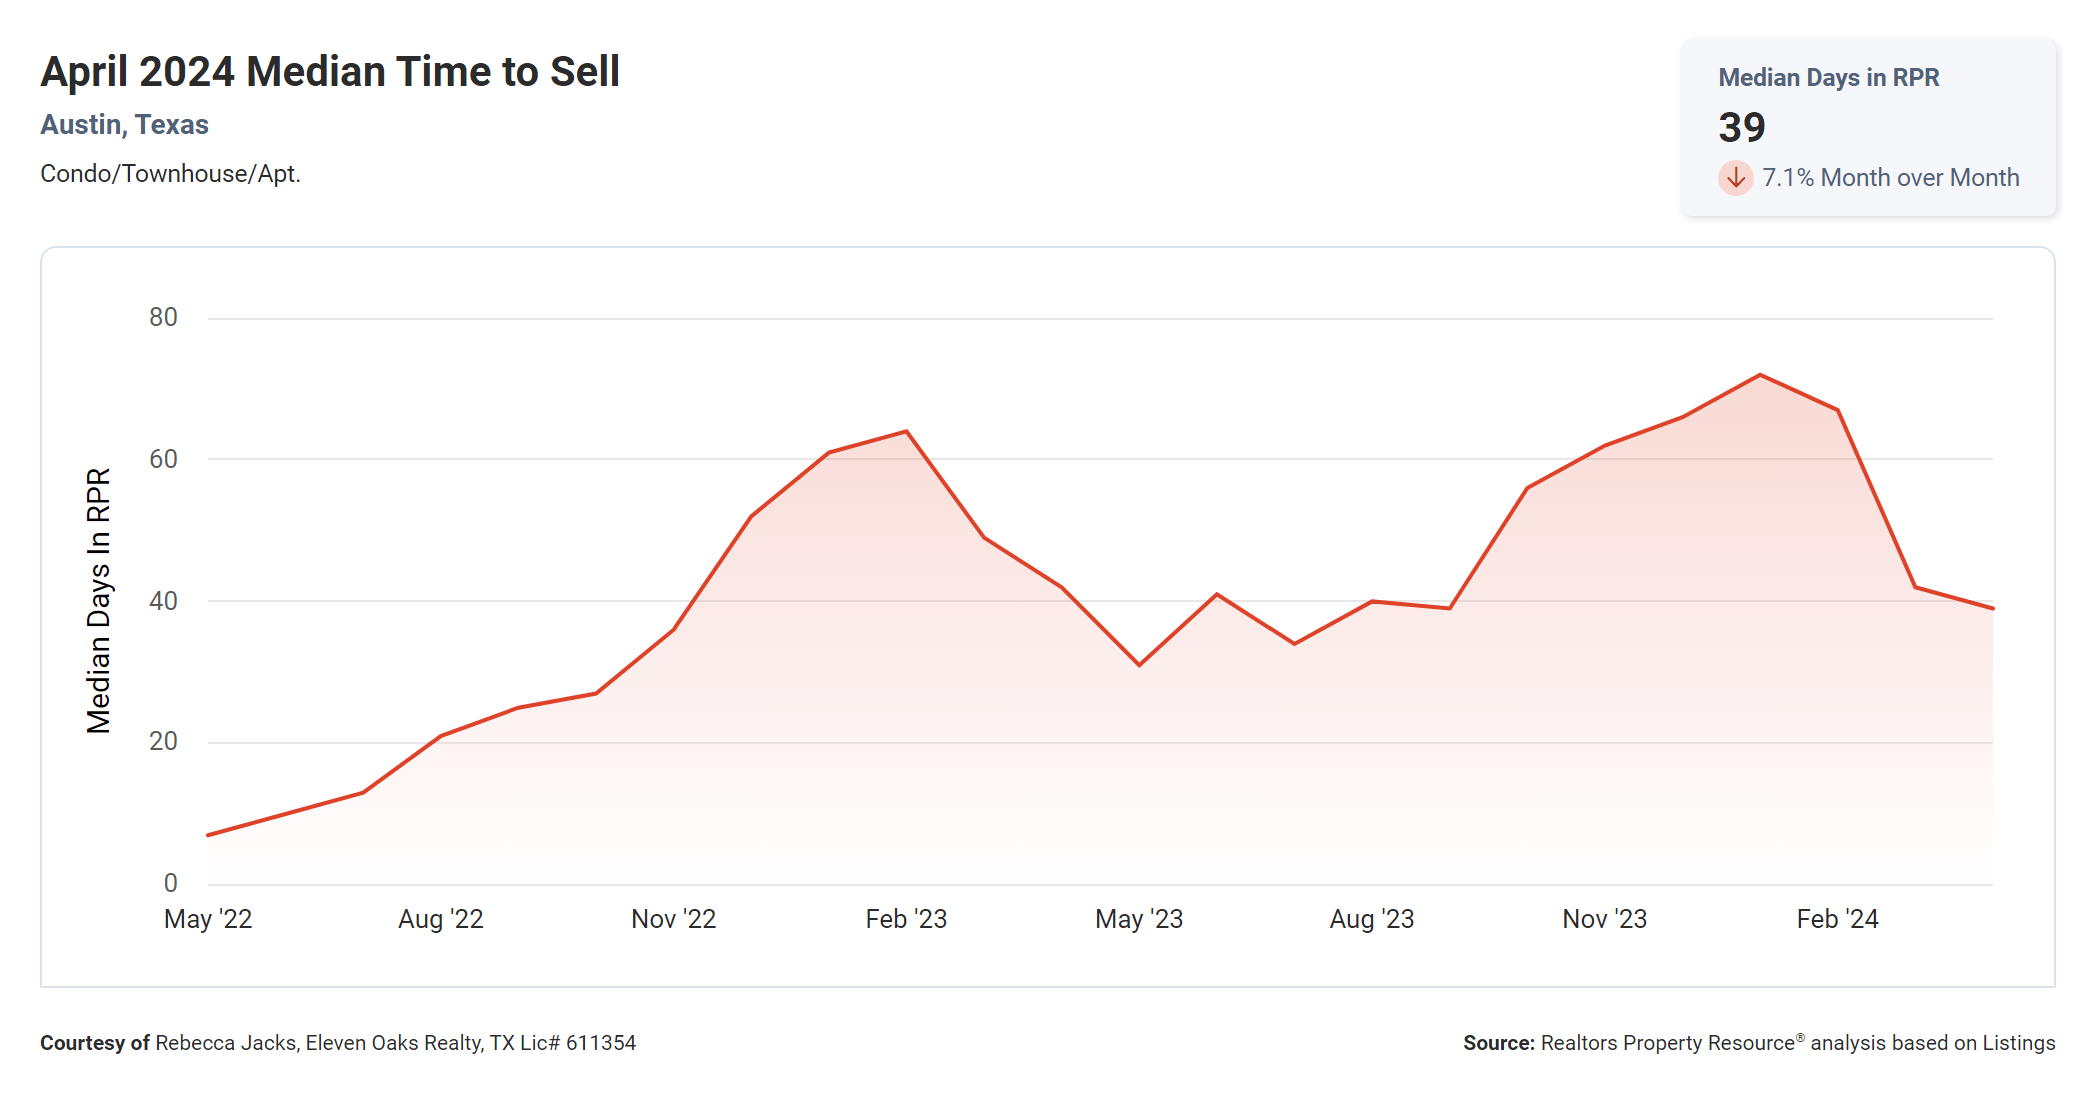 April 2024 Austin condos median time to sell